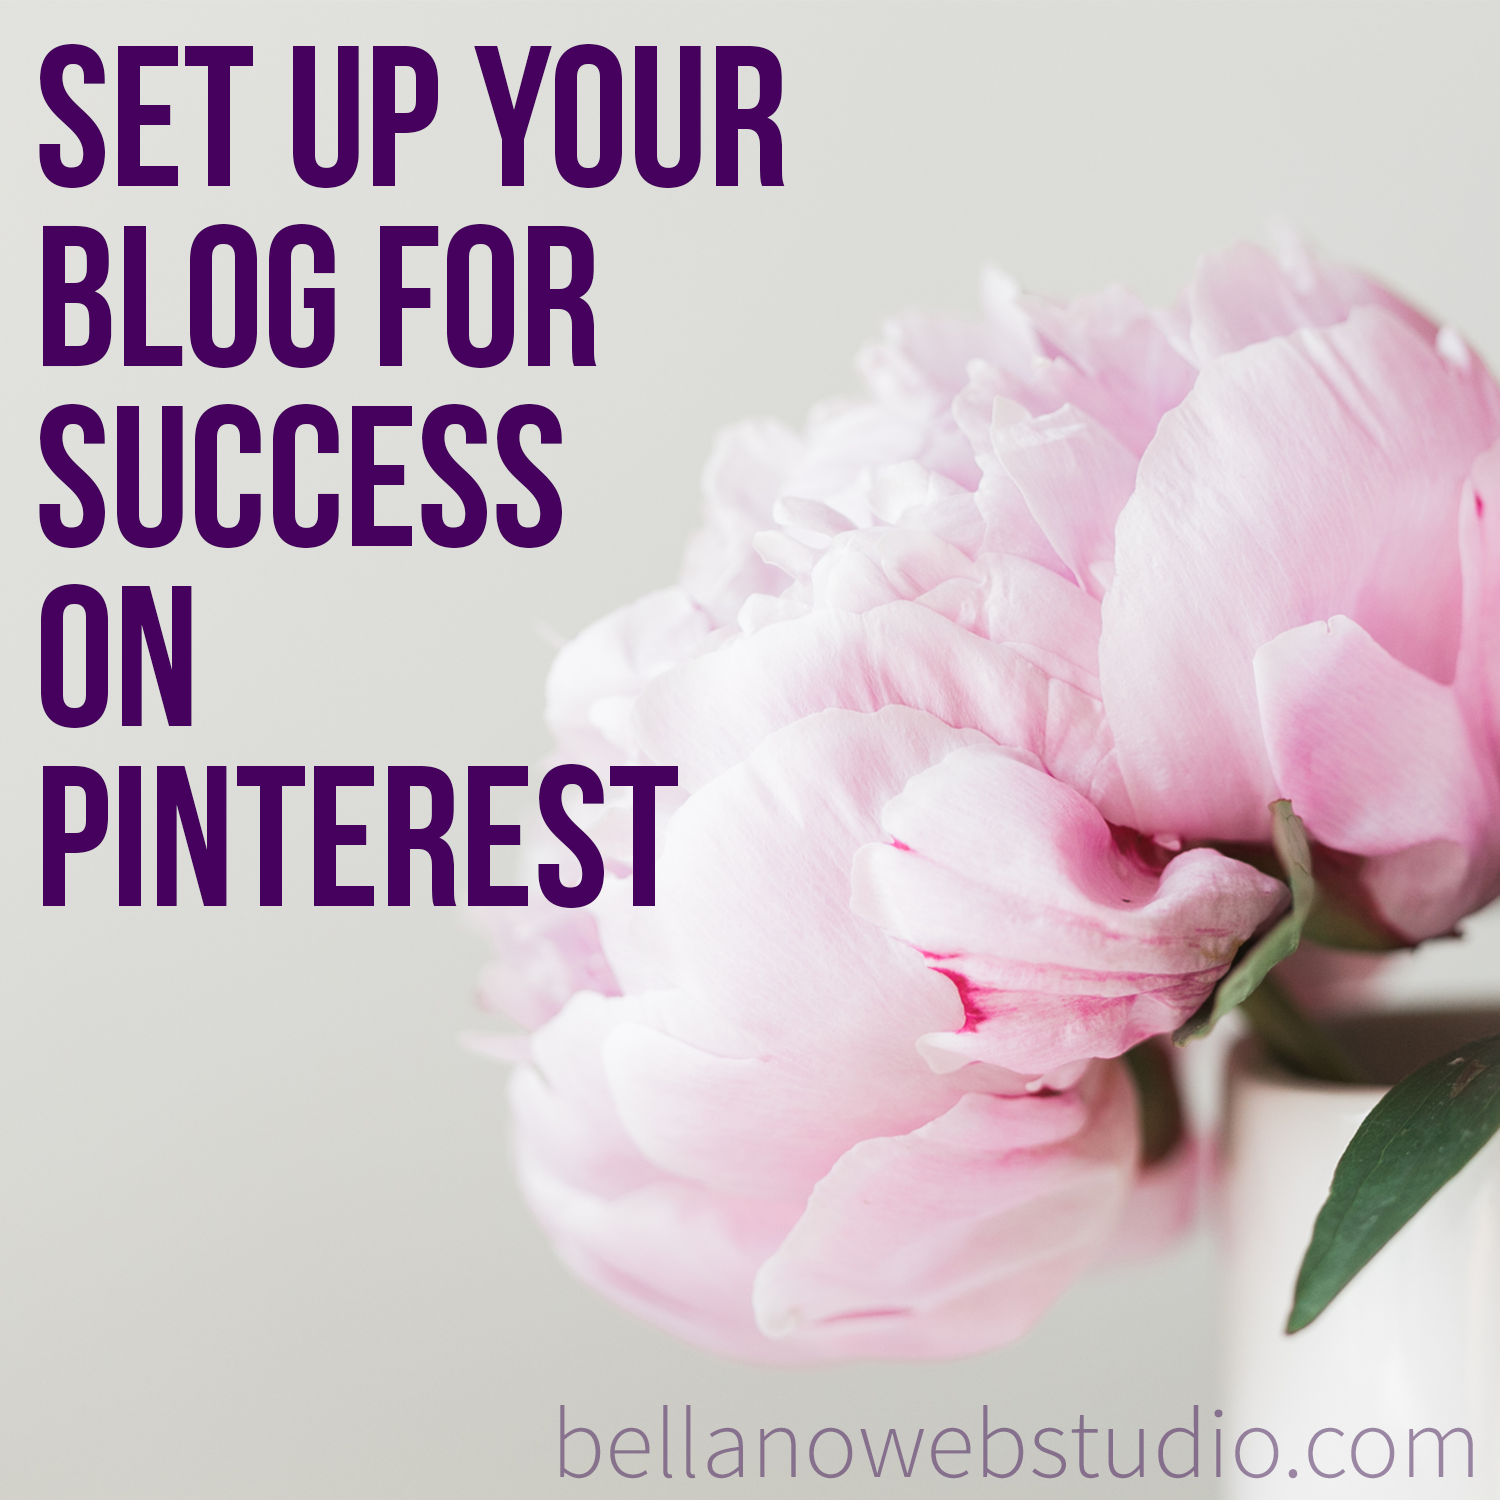 5 Steps to Get Noticed on Pinterest